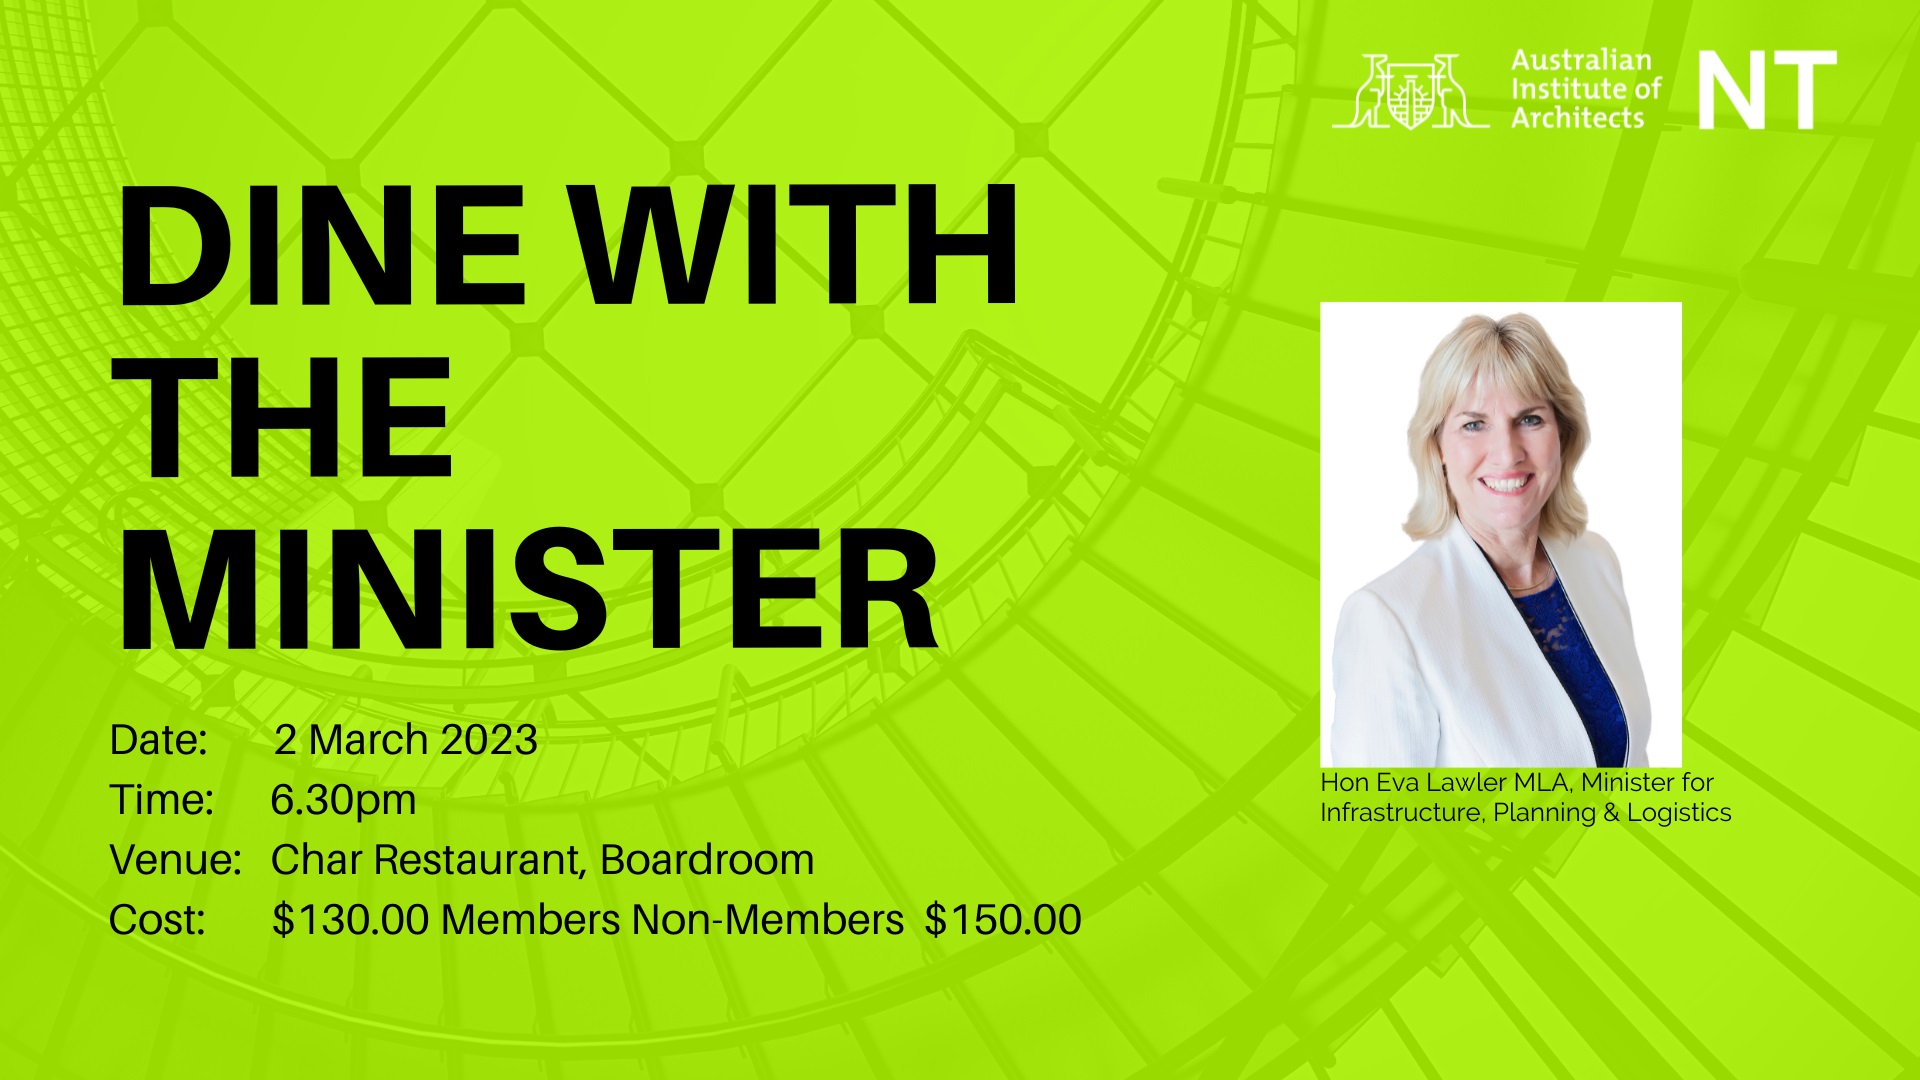 Dine with Minister for Infrastructure, Planning & Logistics